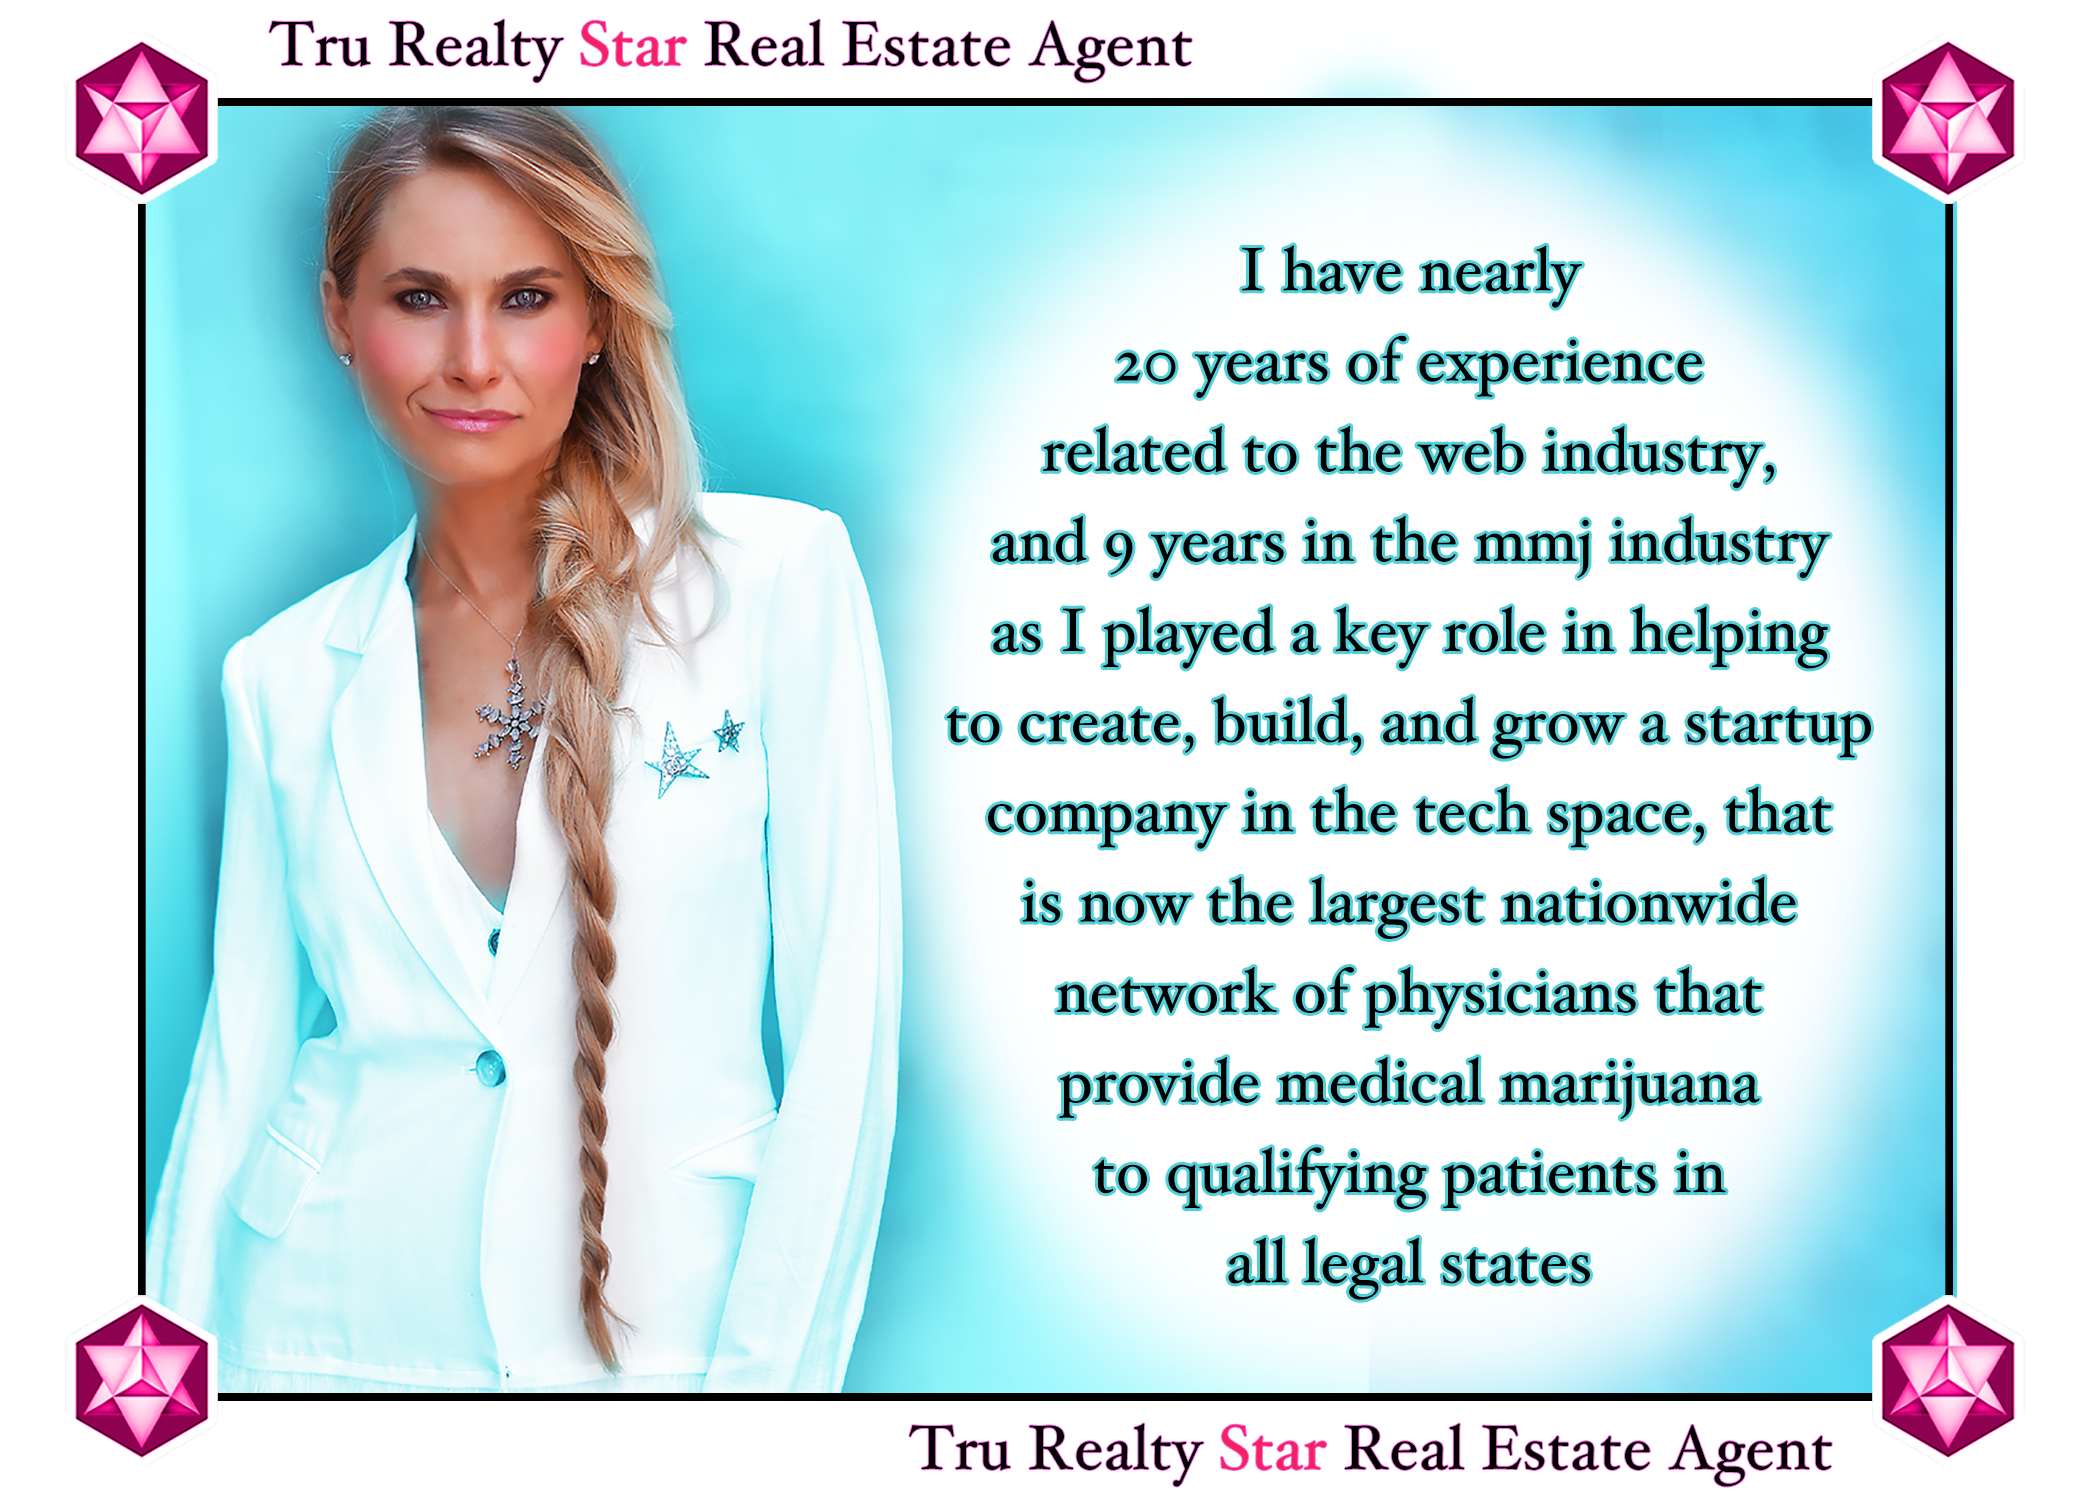 I am a Tru Realty Star Real Estate Agent helping people buy, sell, rent, and invest in Arizona's North Phoenix areas of Anthem, Carefree, Cave Creek, Glendale, Fountain Hills, Paradise Valley, Peoria, Scottsdale, and Surprise